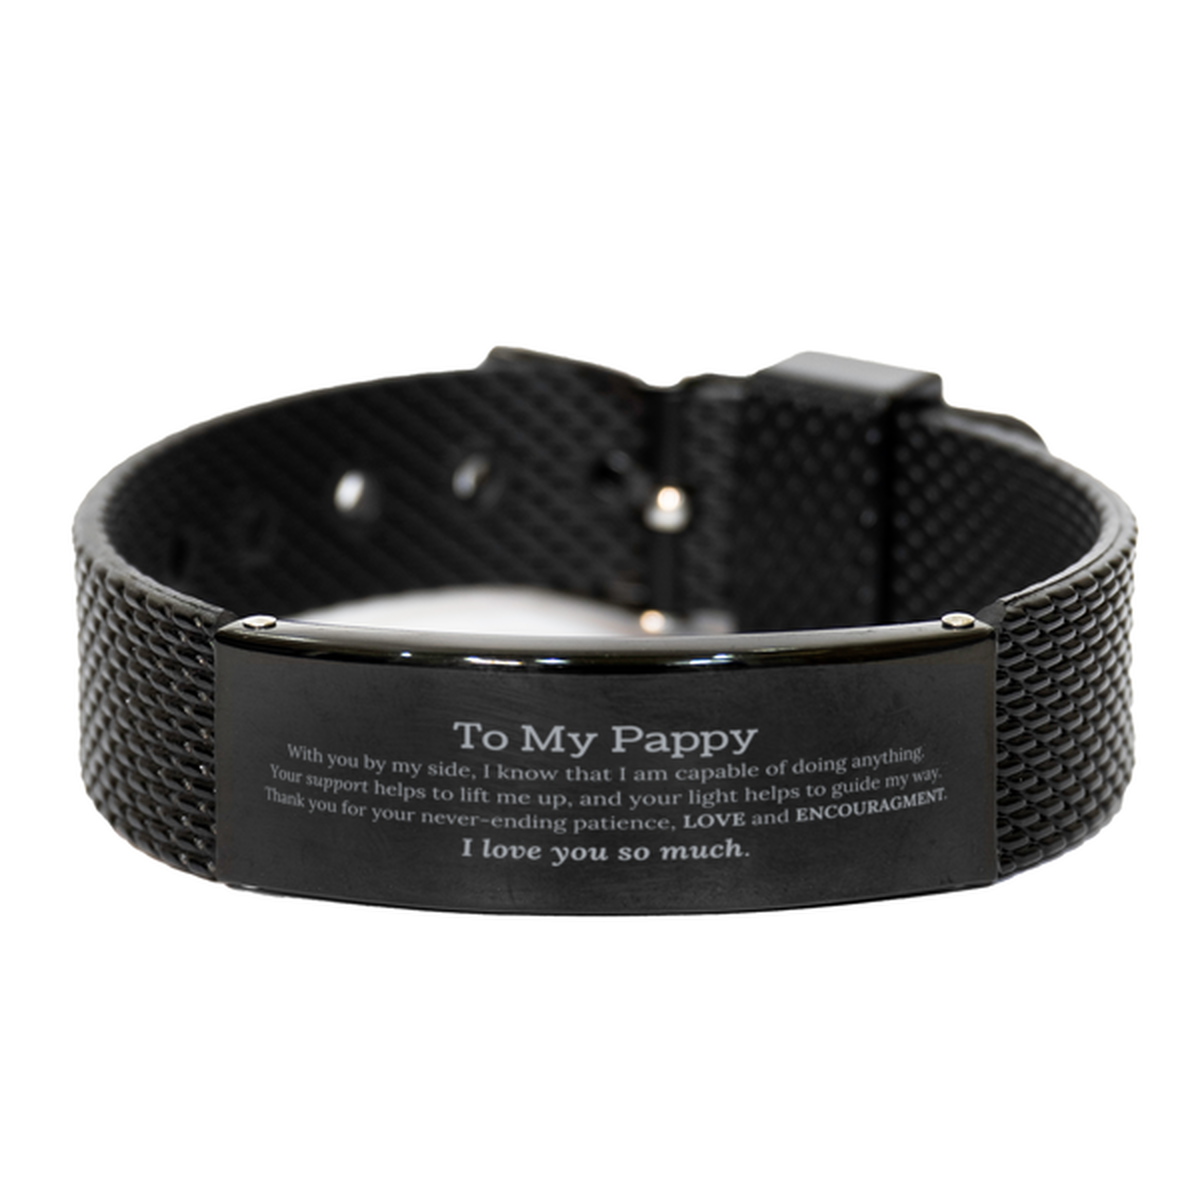 Appreciation Pappy Black Shark Mesh Bracelet Gifts, To My Pappy Birthday Christmas Wedding Keepsake Gifts for Pappy With you by my side, I know that I am capable of doing anything. I love you so much